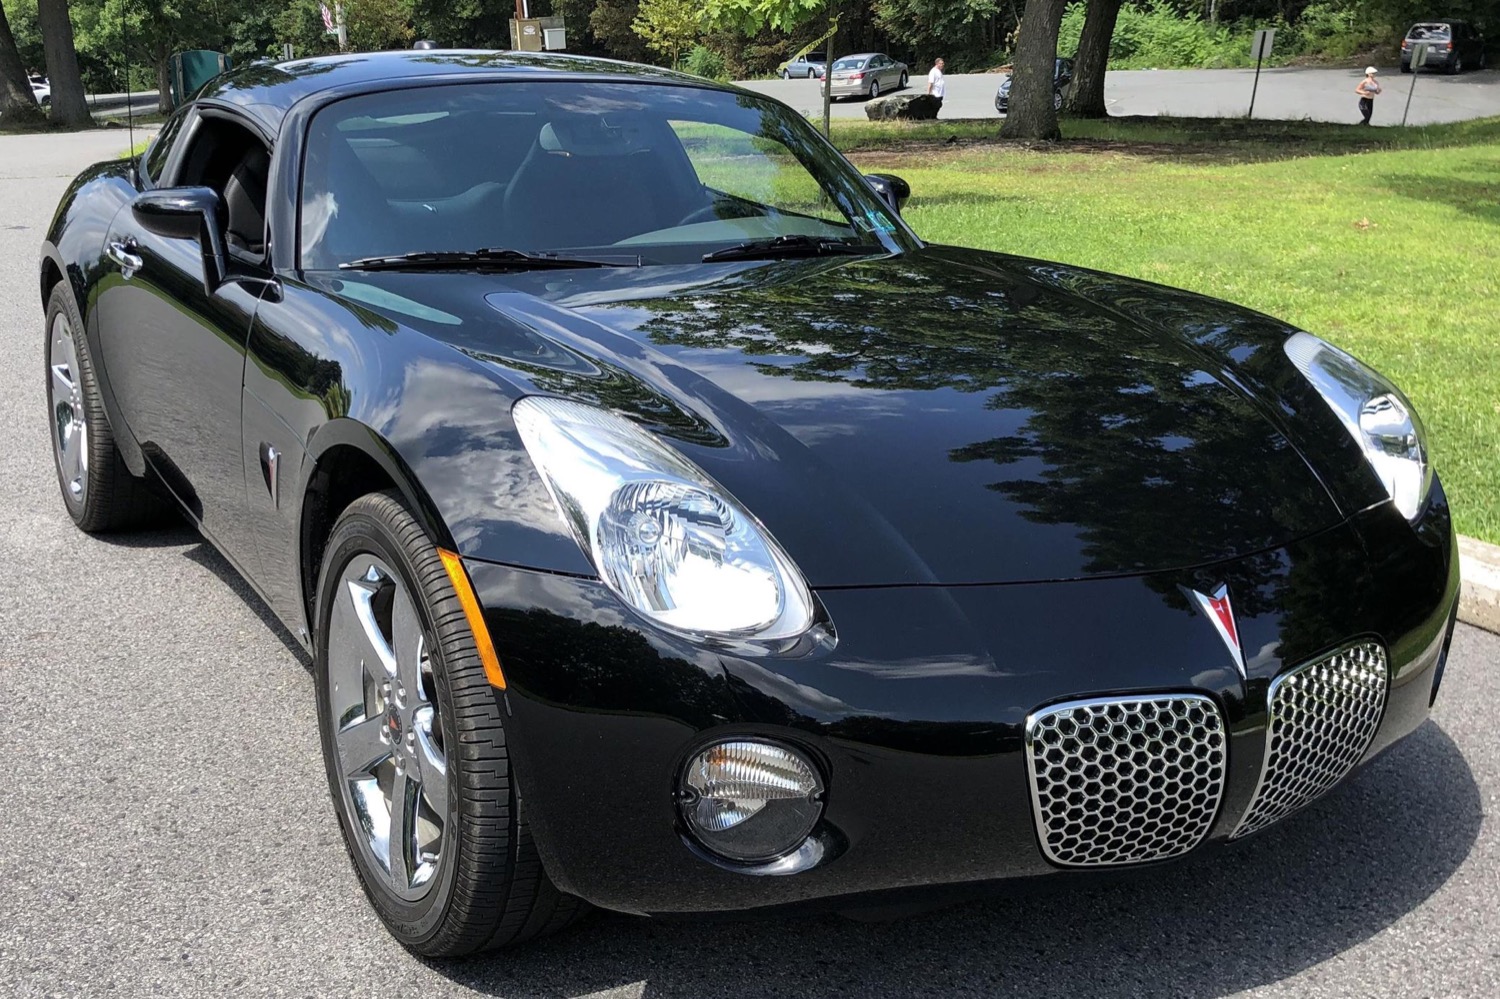 Low-Mileage 2009 Pontiac Solstice Coupe Up For Sale: Video